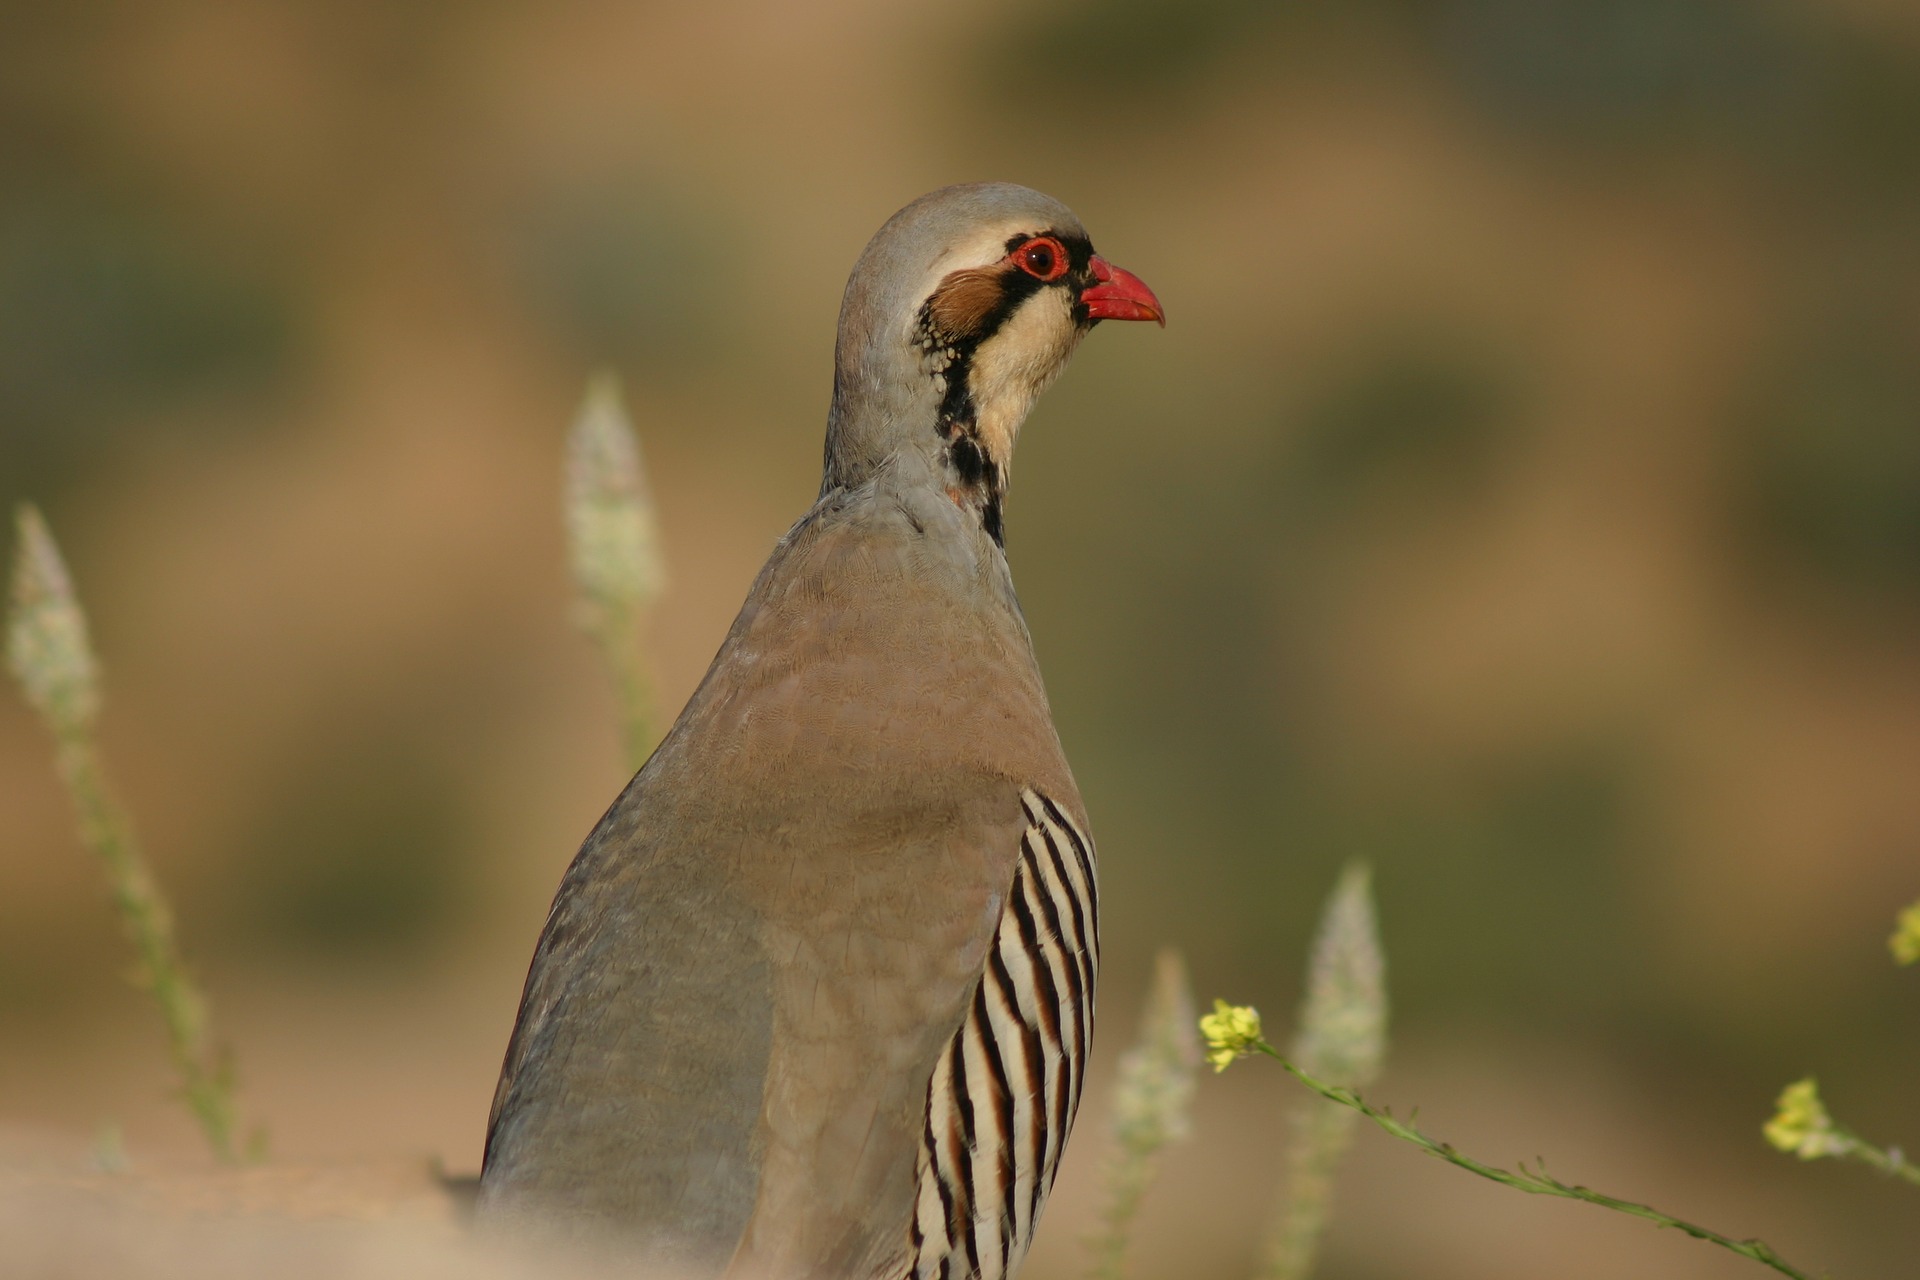 Chukar favor steep hillsides and ravines to roost and forage, and they behave erratically, running uphill and flying downhill.